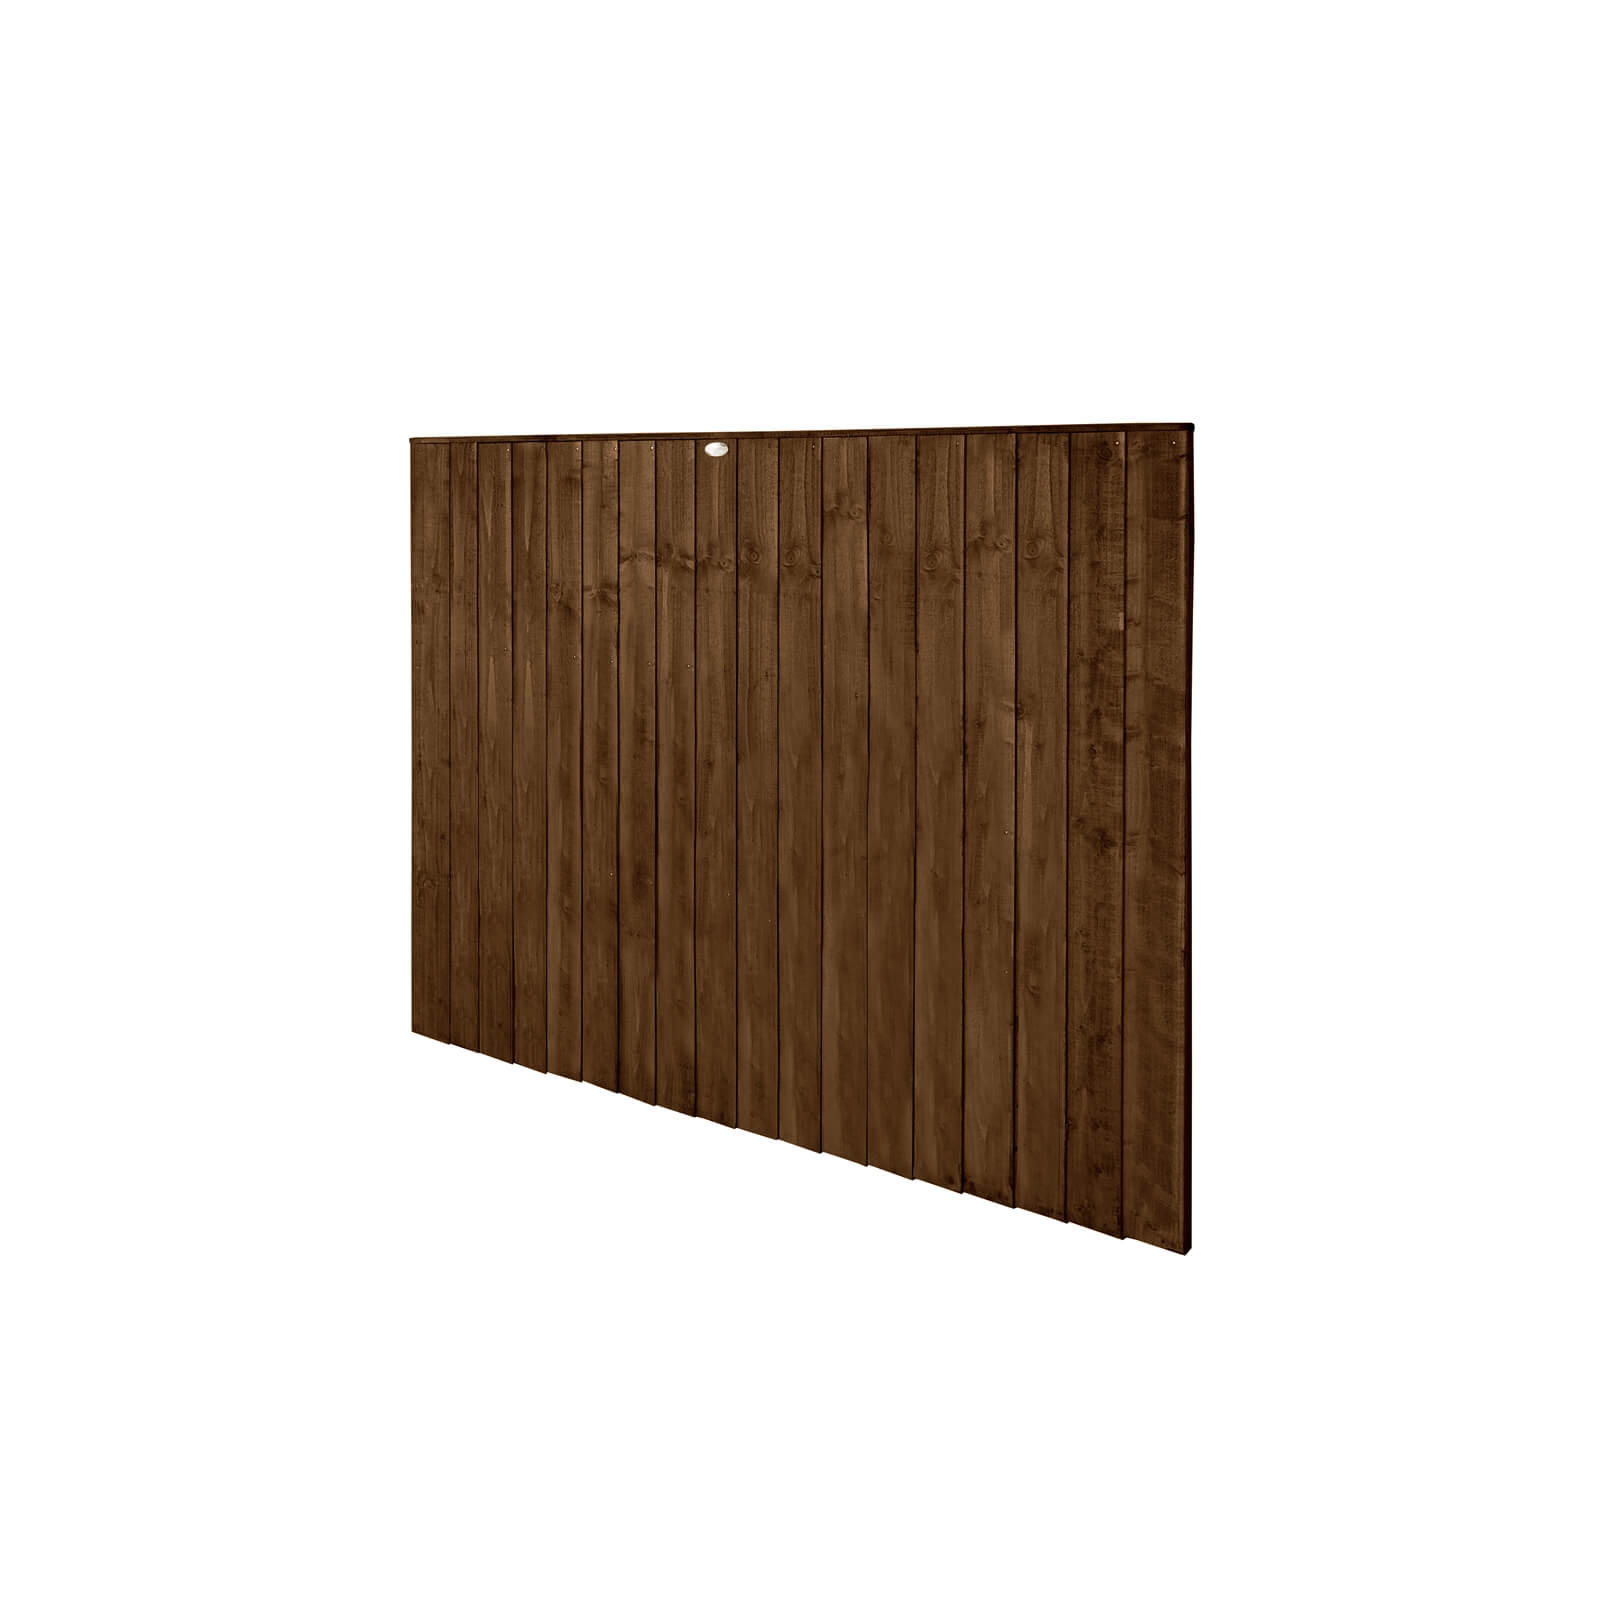 6ft x 5ft (1.83m x 1.54m) Pressure Treated Featheredge Fence Panel (Dark Brown) - Pack of 5